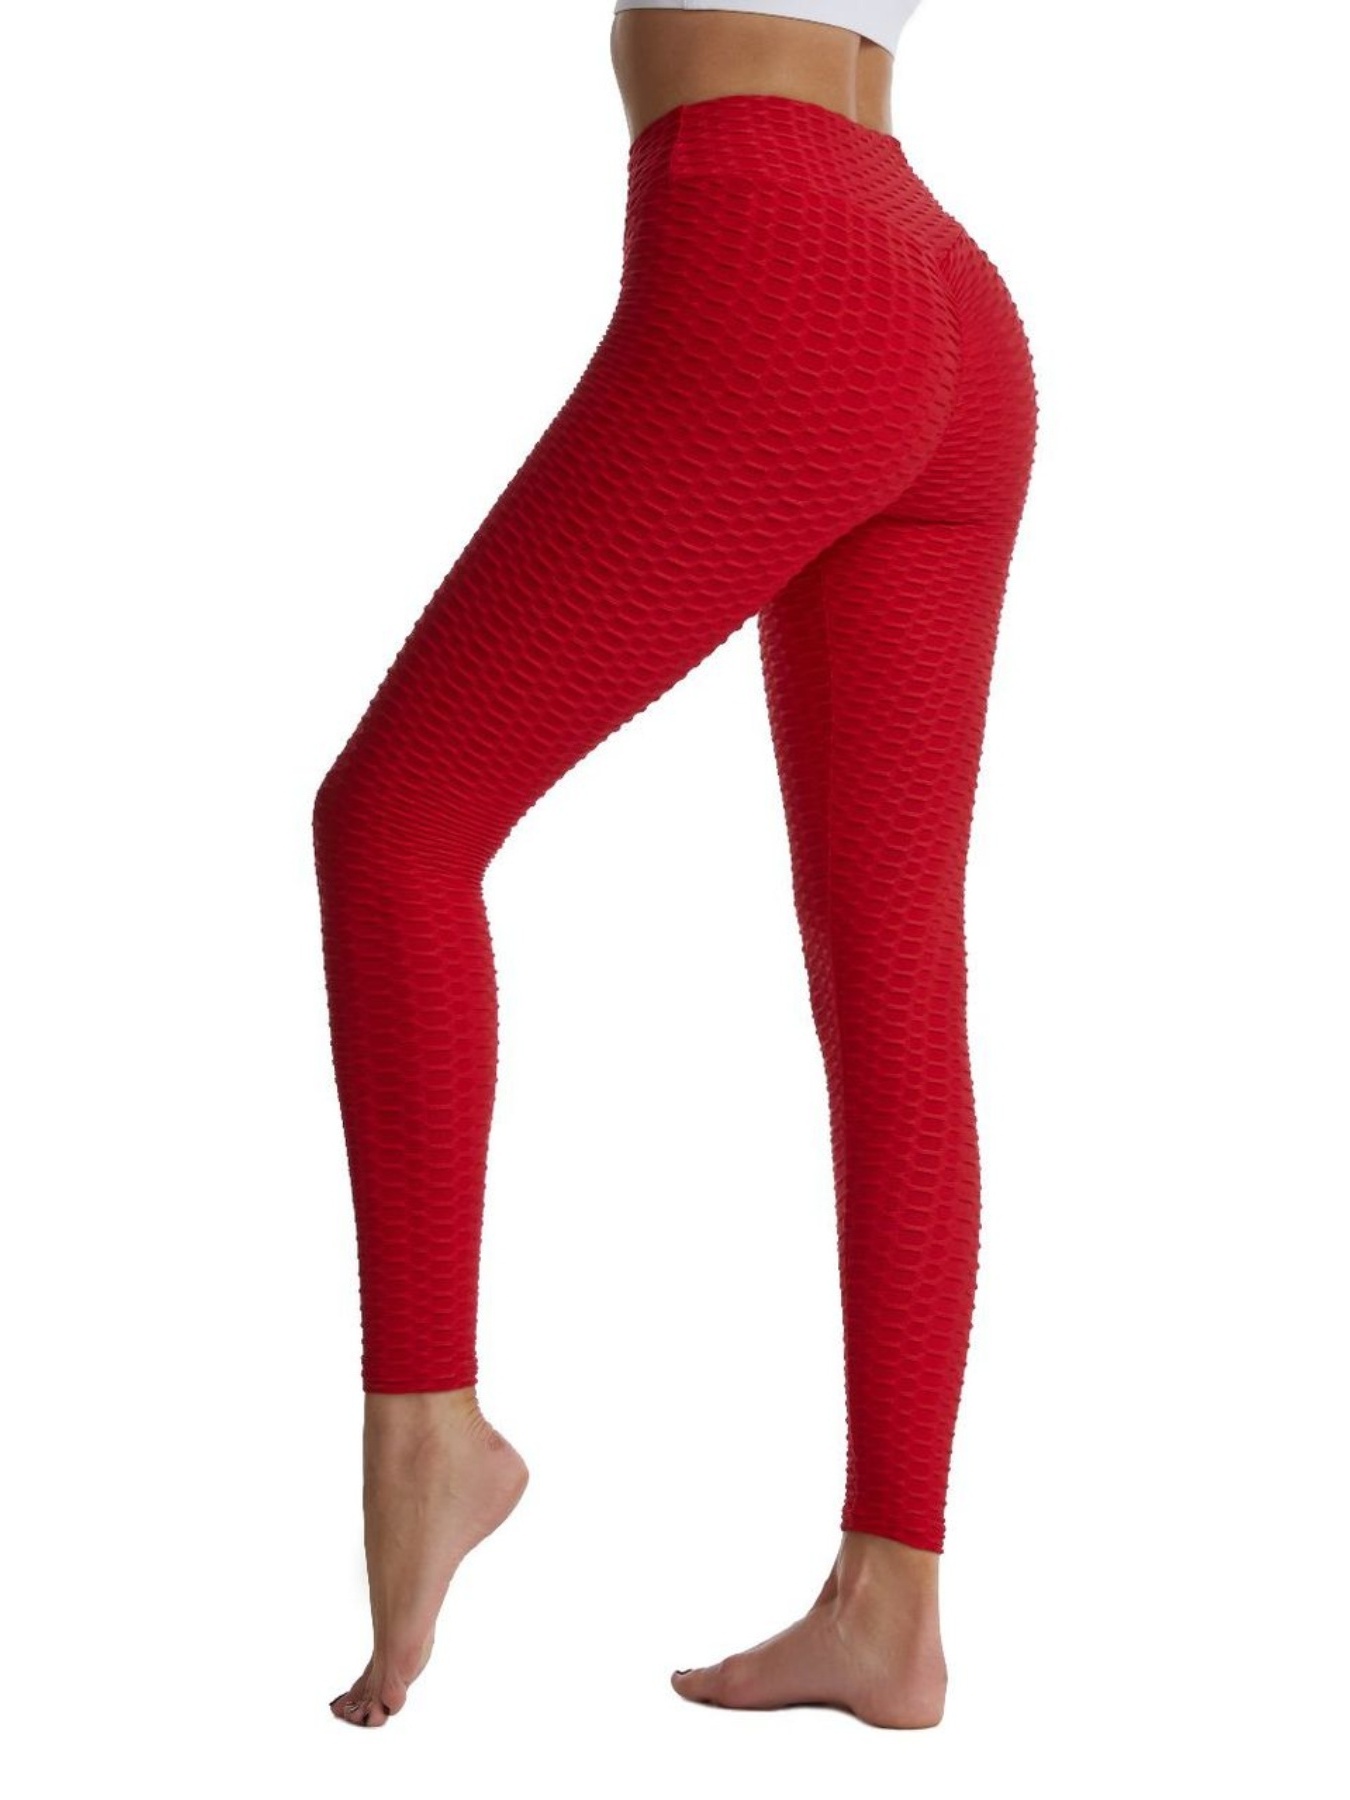 High Waist Yoga Pants for Women - Stretchy and Comfortable Leggings for  Sports and Fitness